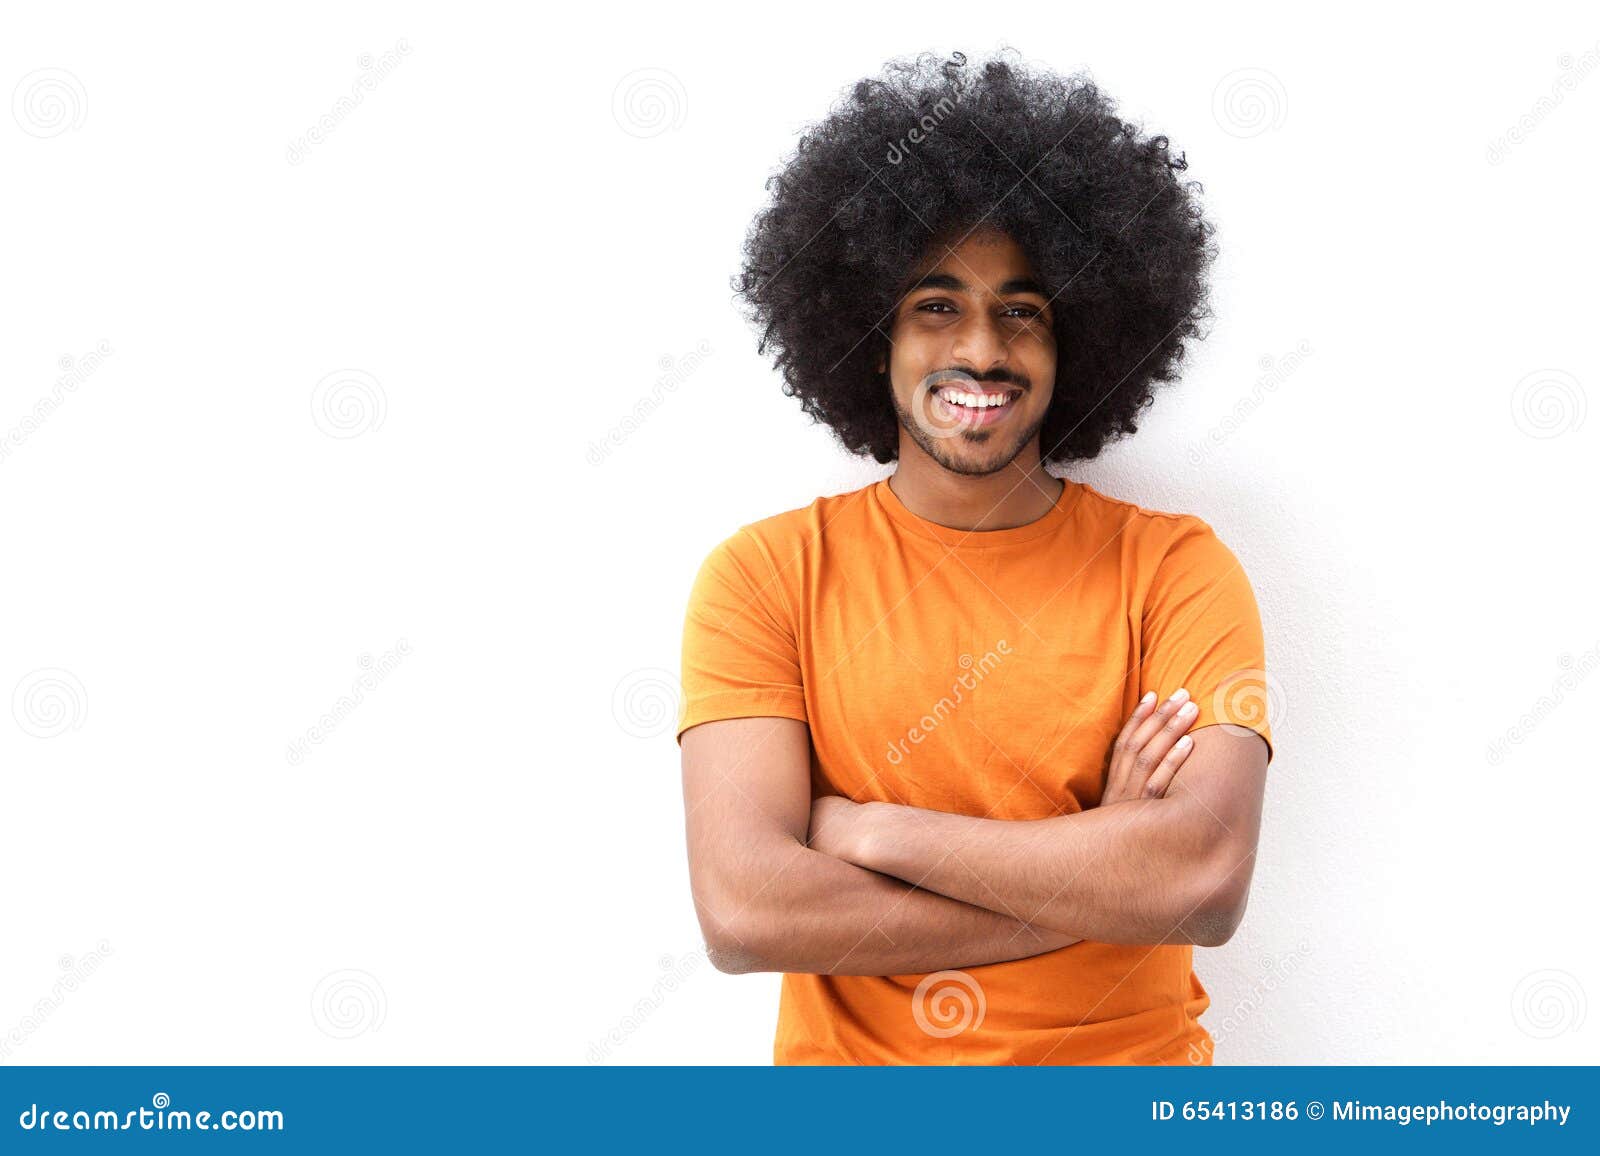 With an person afro white White Men